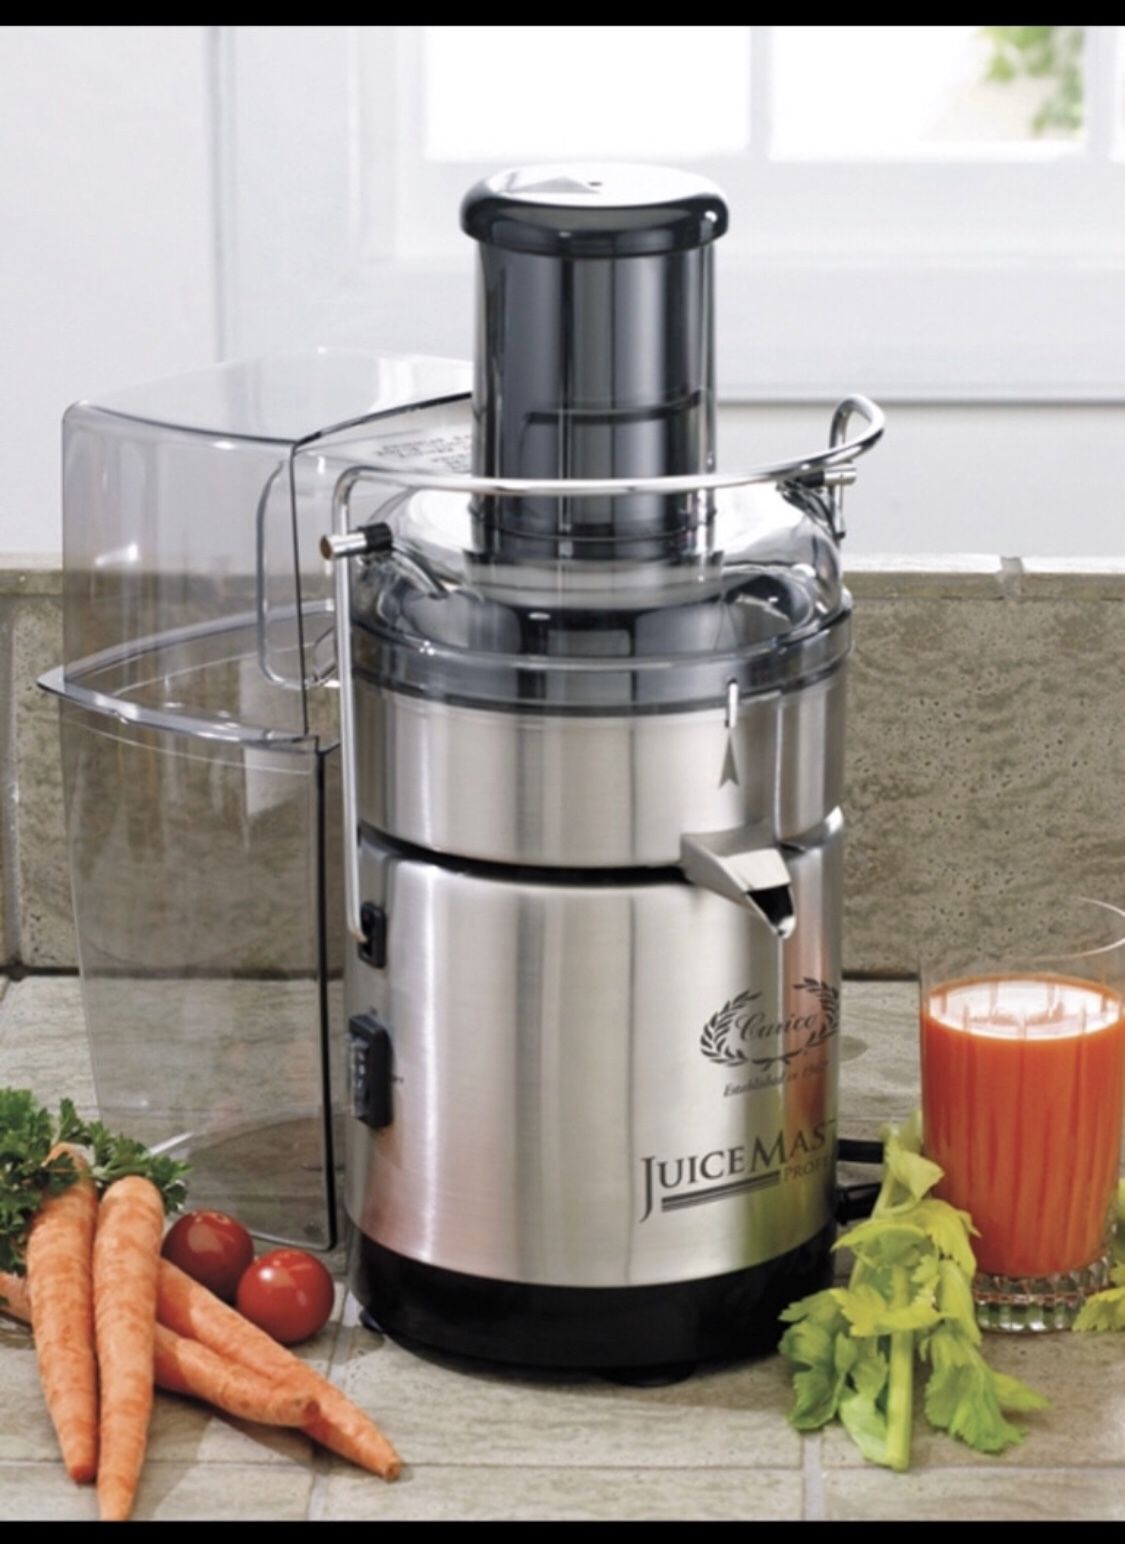 JuiceMaster Pro - Commercial grade stainless steel juicer